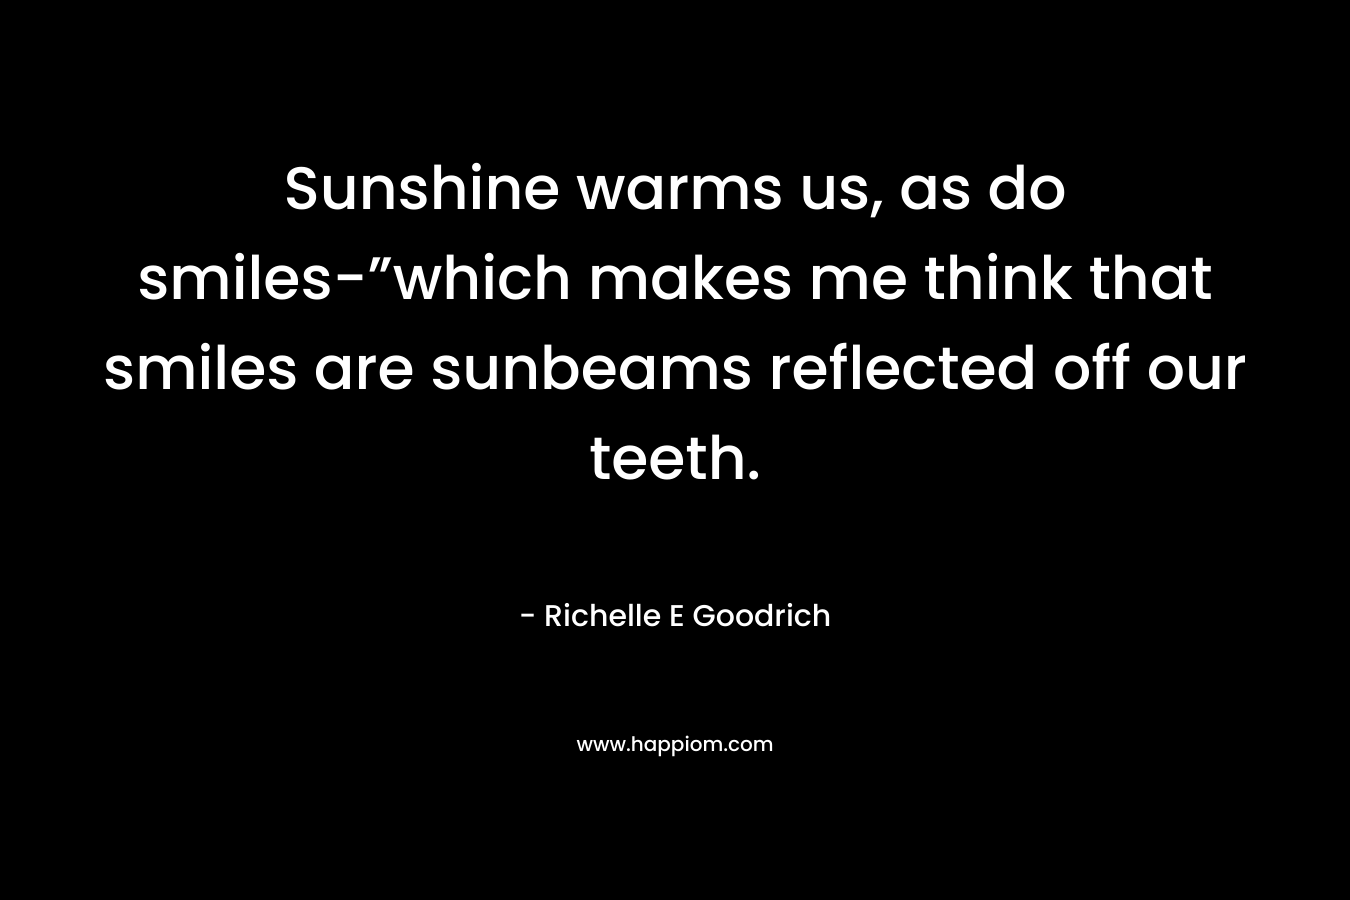 Sunshine warms us, as do smiles-”which makes me think that smiles are sunbeams reflected off our teeth. – Richelle E Goodrich